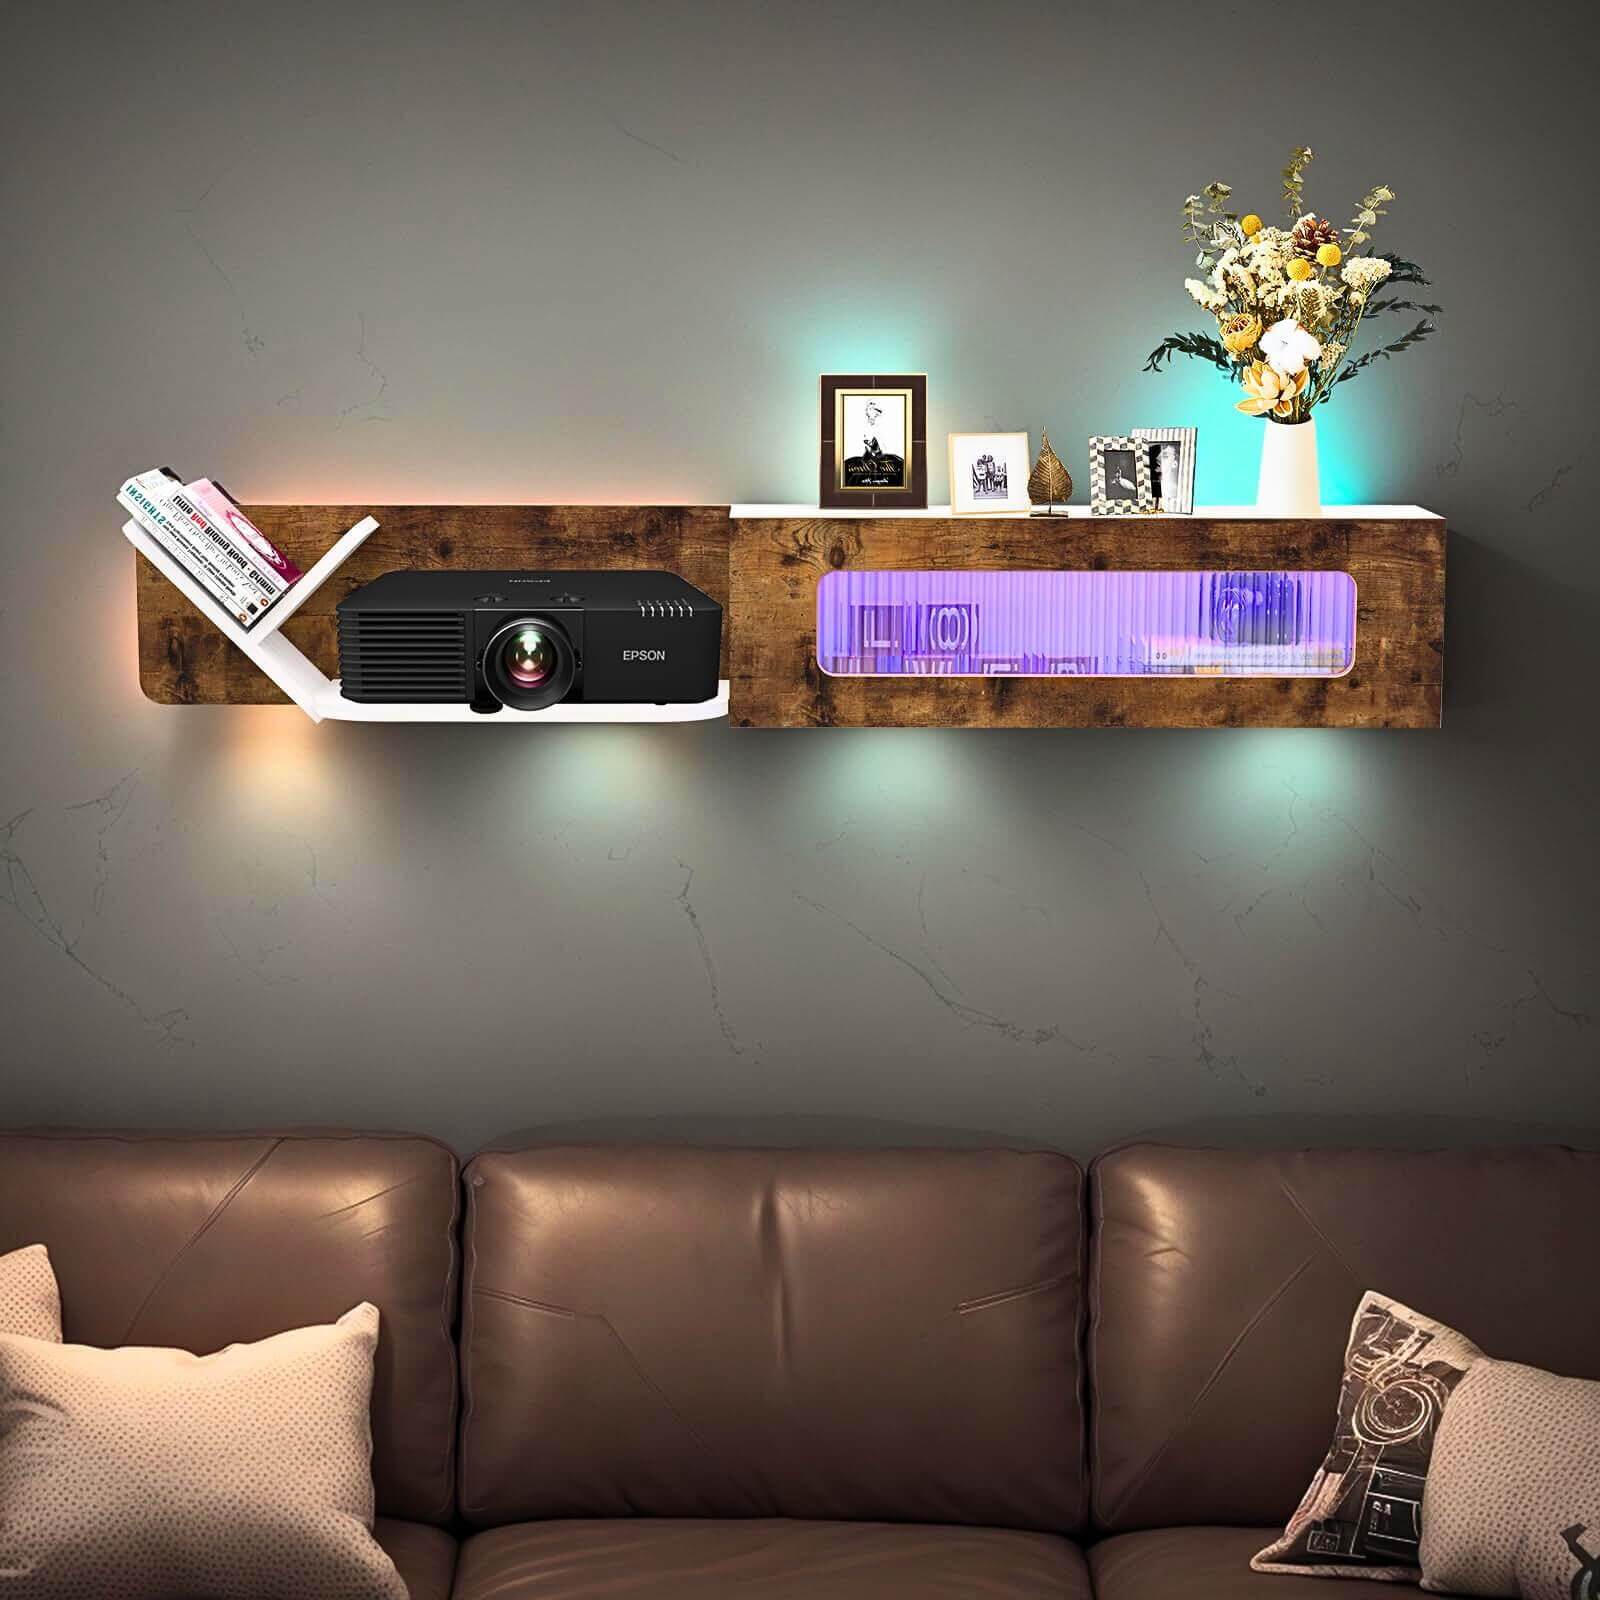 Custom Modern Plywood Floating TV Stand with LED Lights and Glass Door Media Console